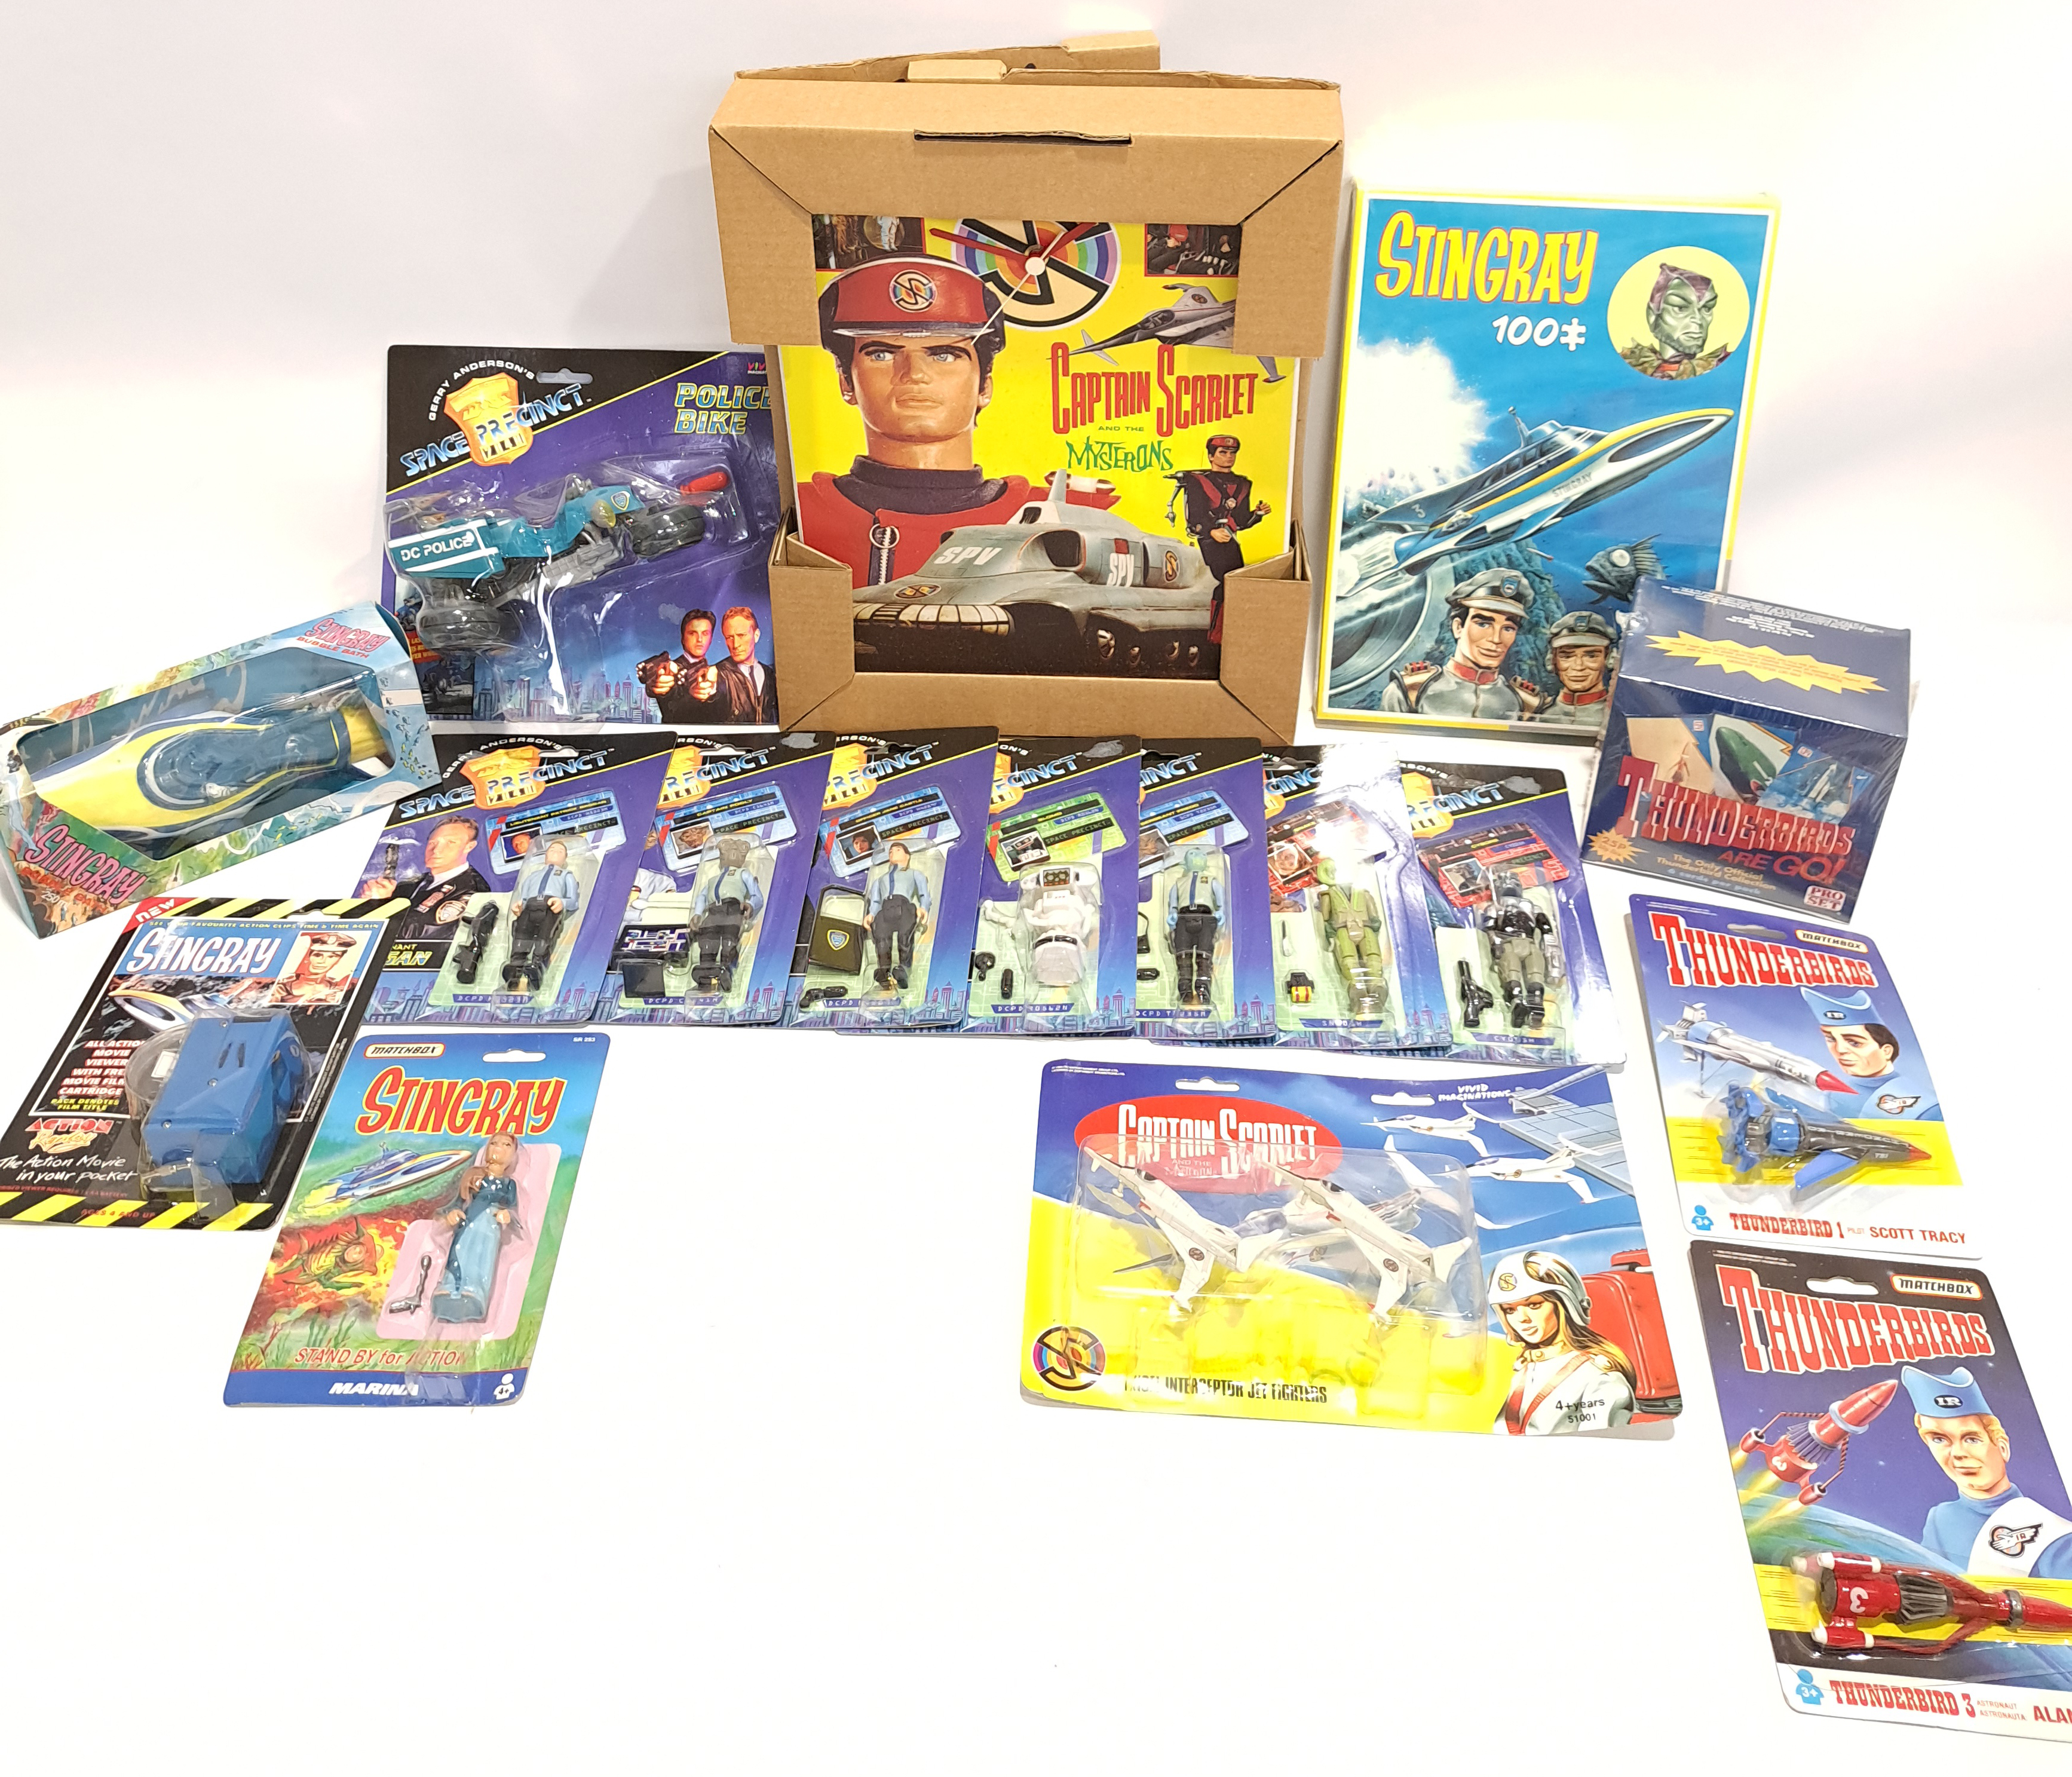 Quantity of Gerry Anderson Collectibles 